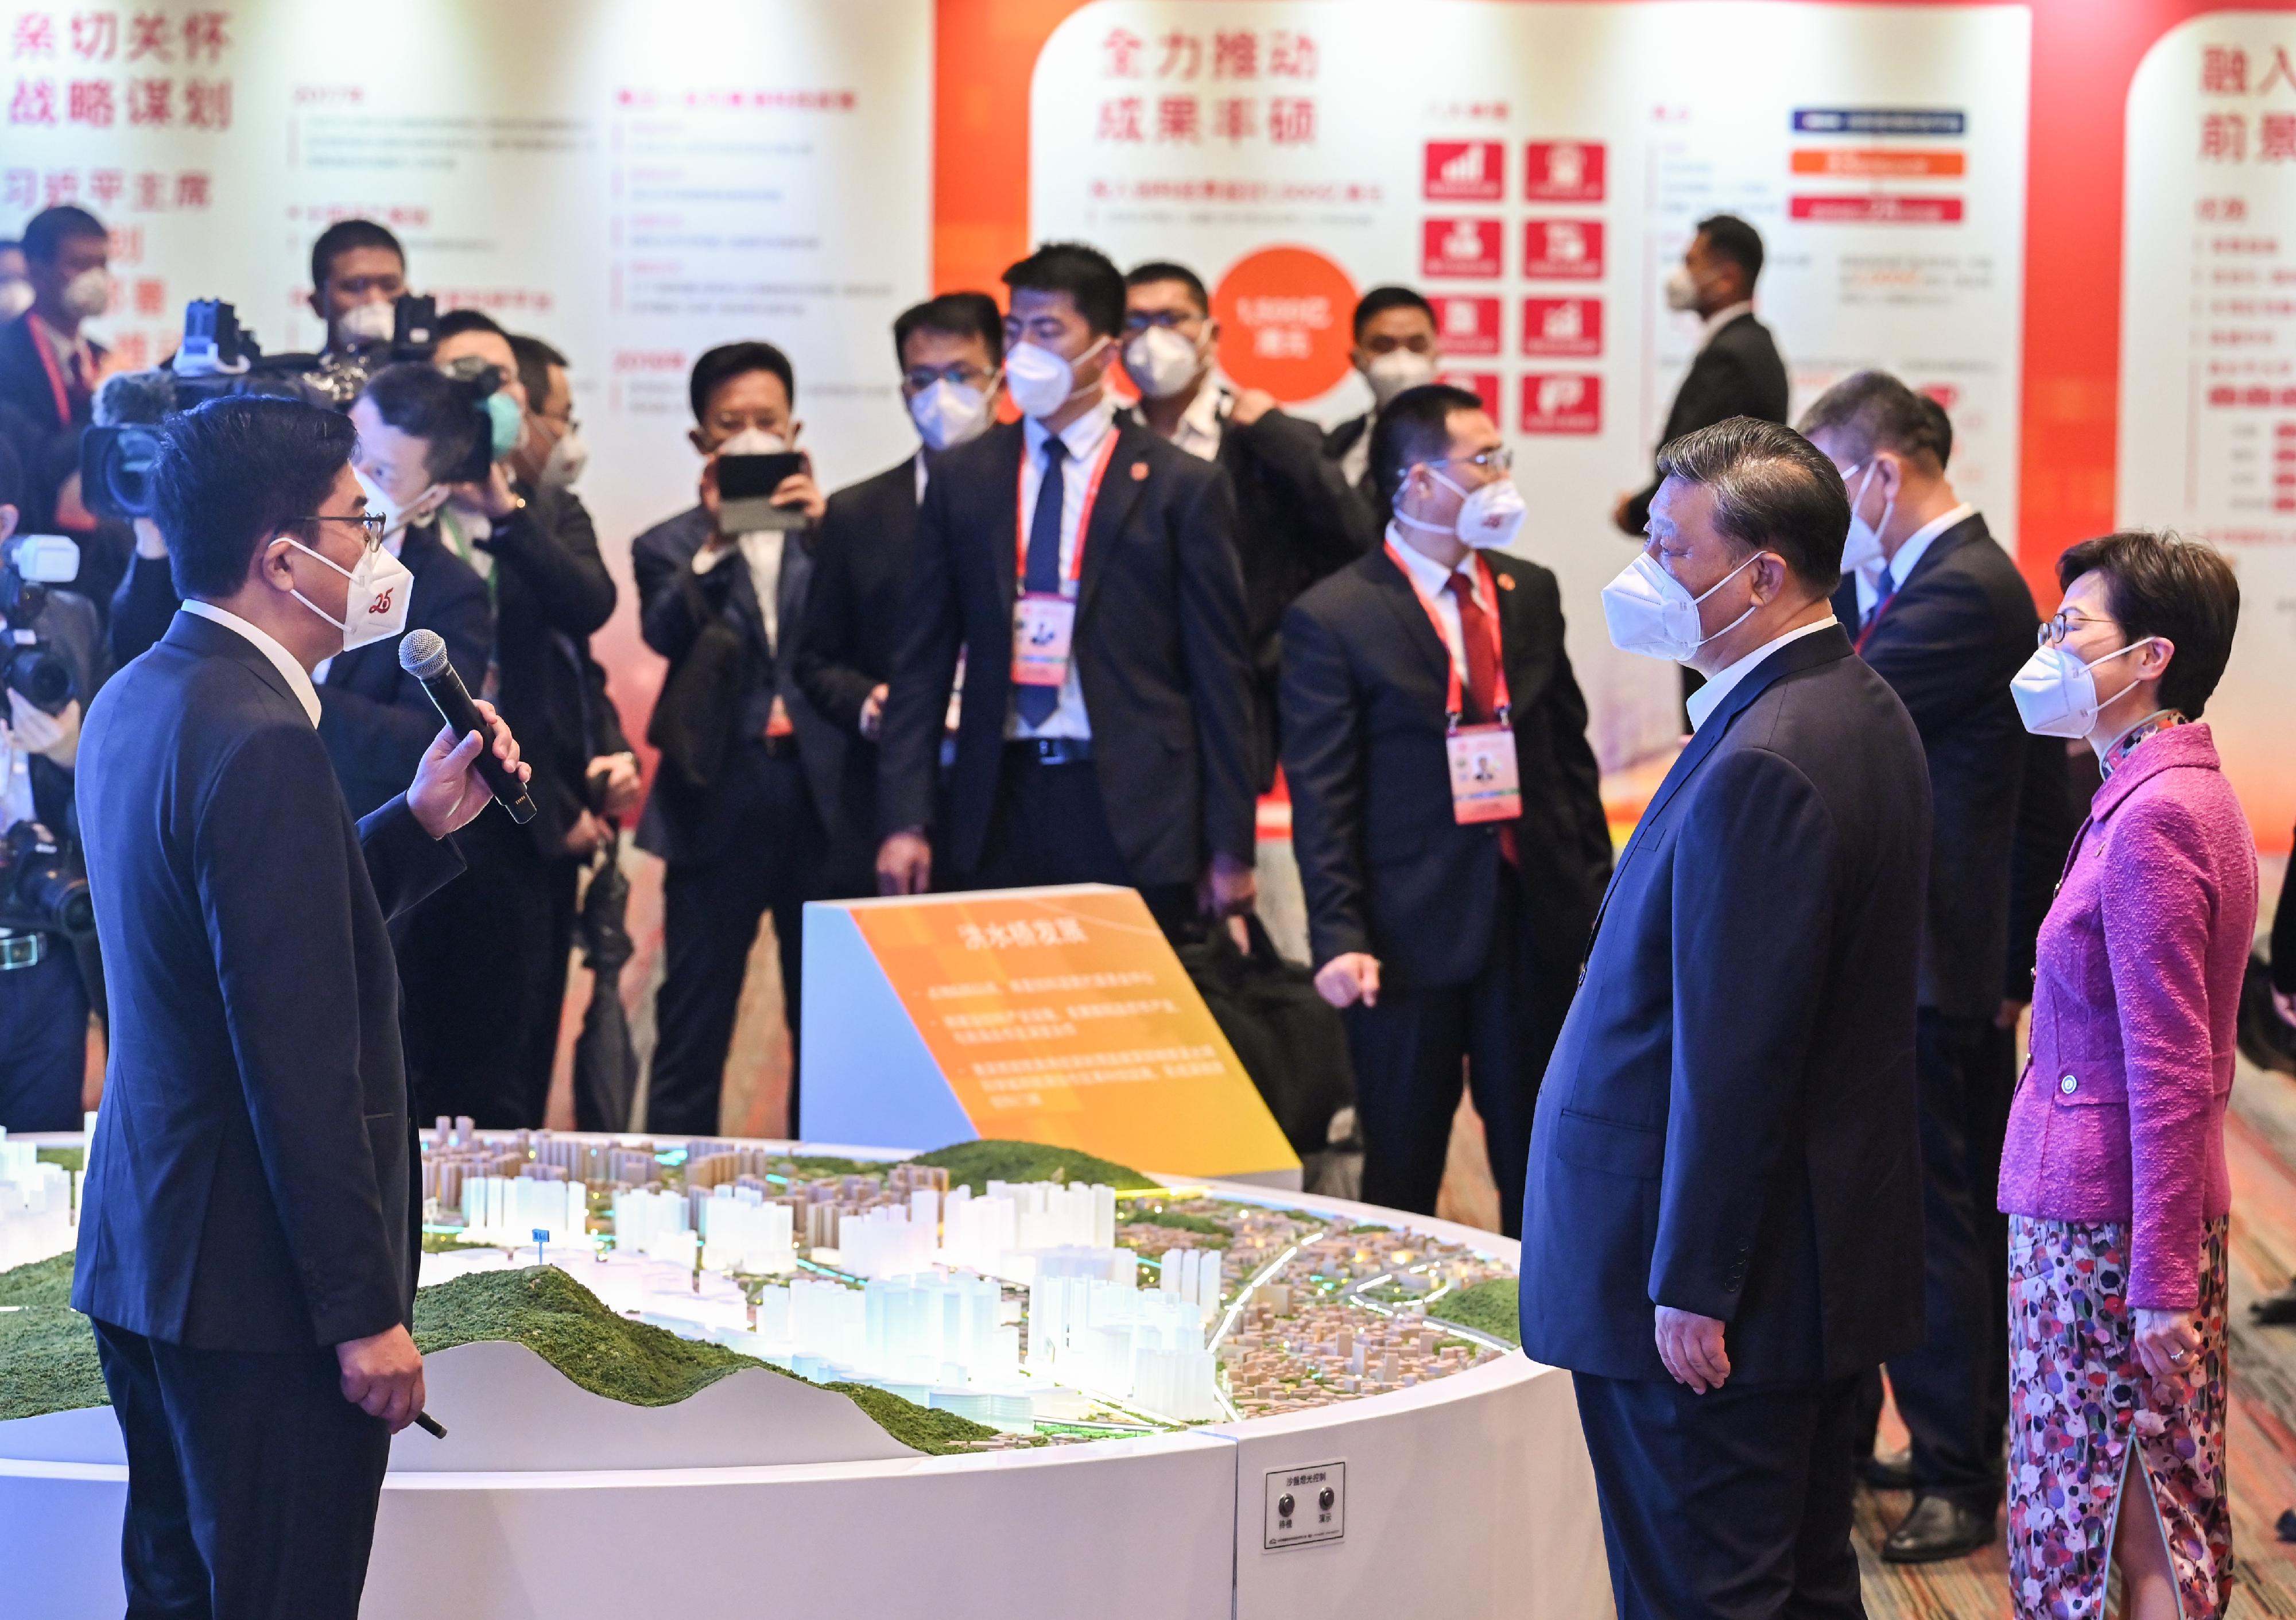 President Xi Jinping visited the Hong Kong Science Park to inspect the development of innovation and technology in Hong Kong today (June 30). Photo shows President Xi (second right), accompanied by the Chief Executive, Mrs Carrie Lam (first right), receiving a briefing from the Secretary for Development, Mr Michael Wong (first left), on the Hung Shui Kiu/Ha Tsuen New Development Area.